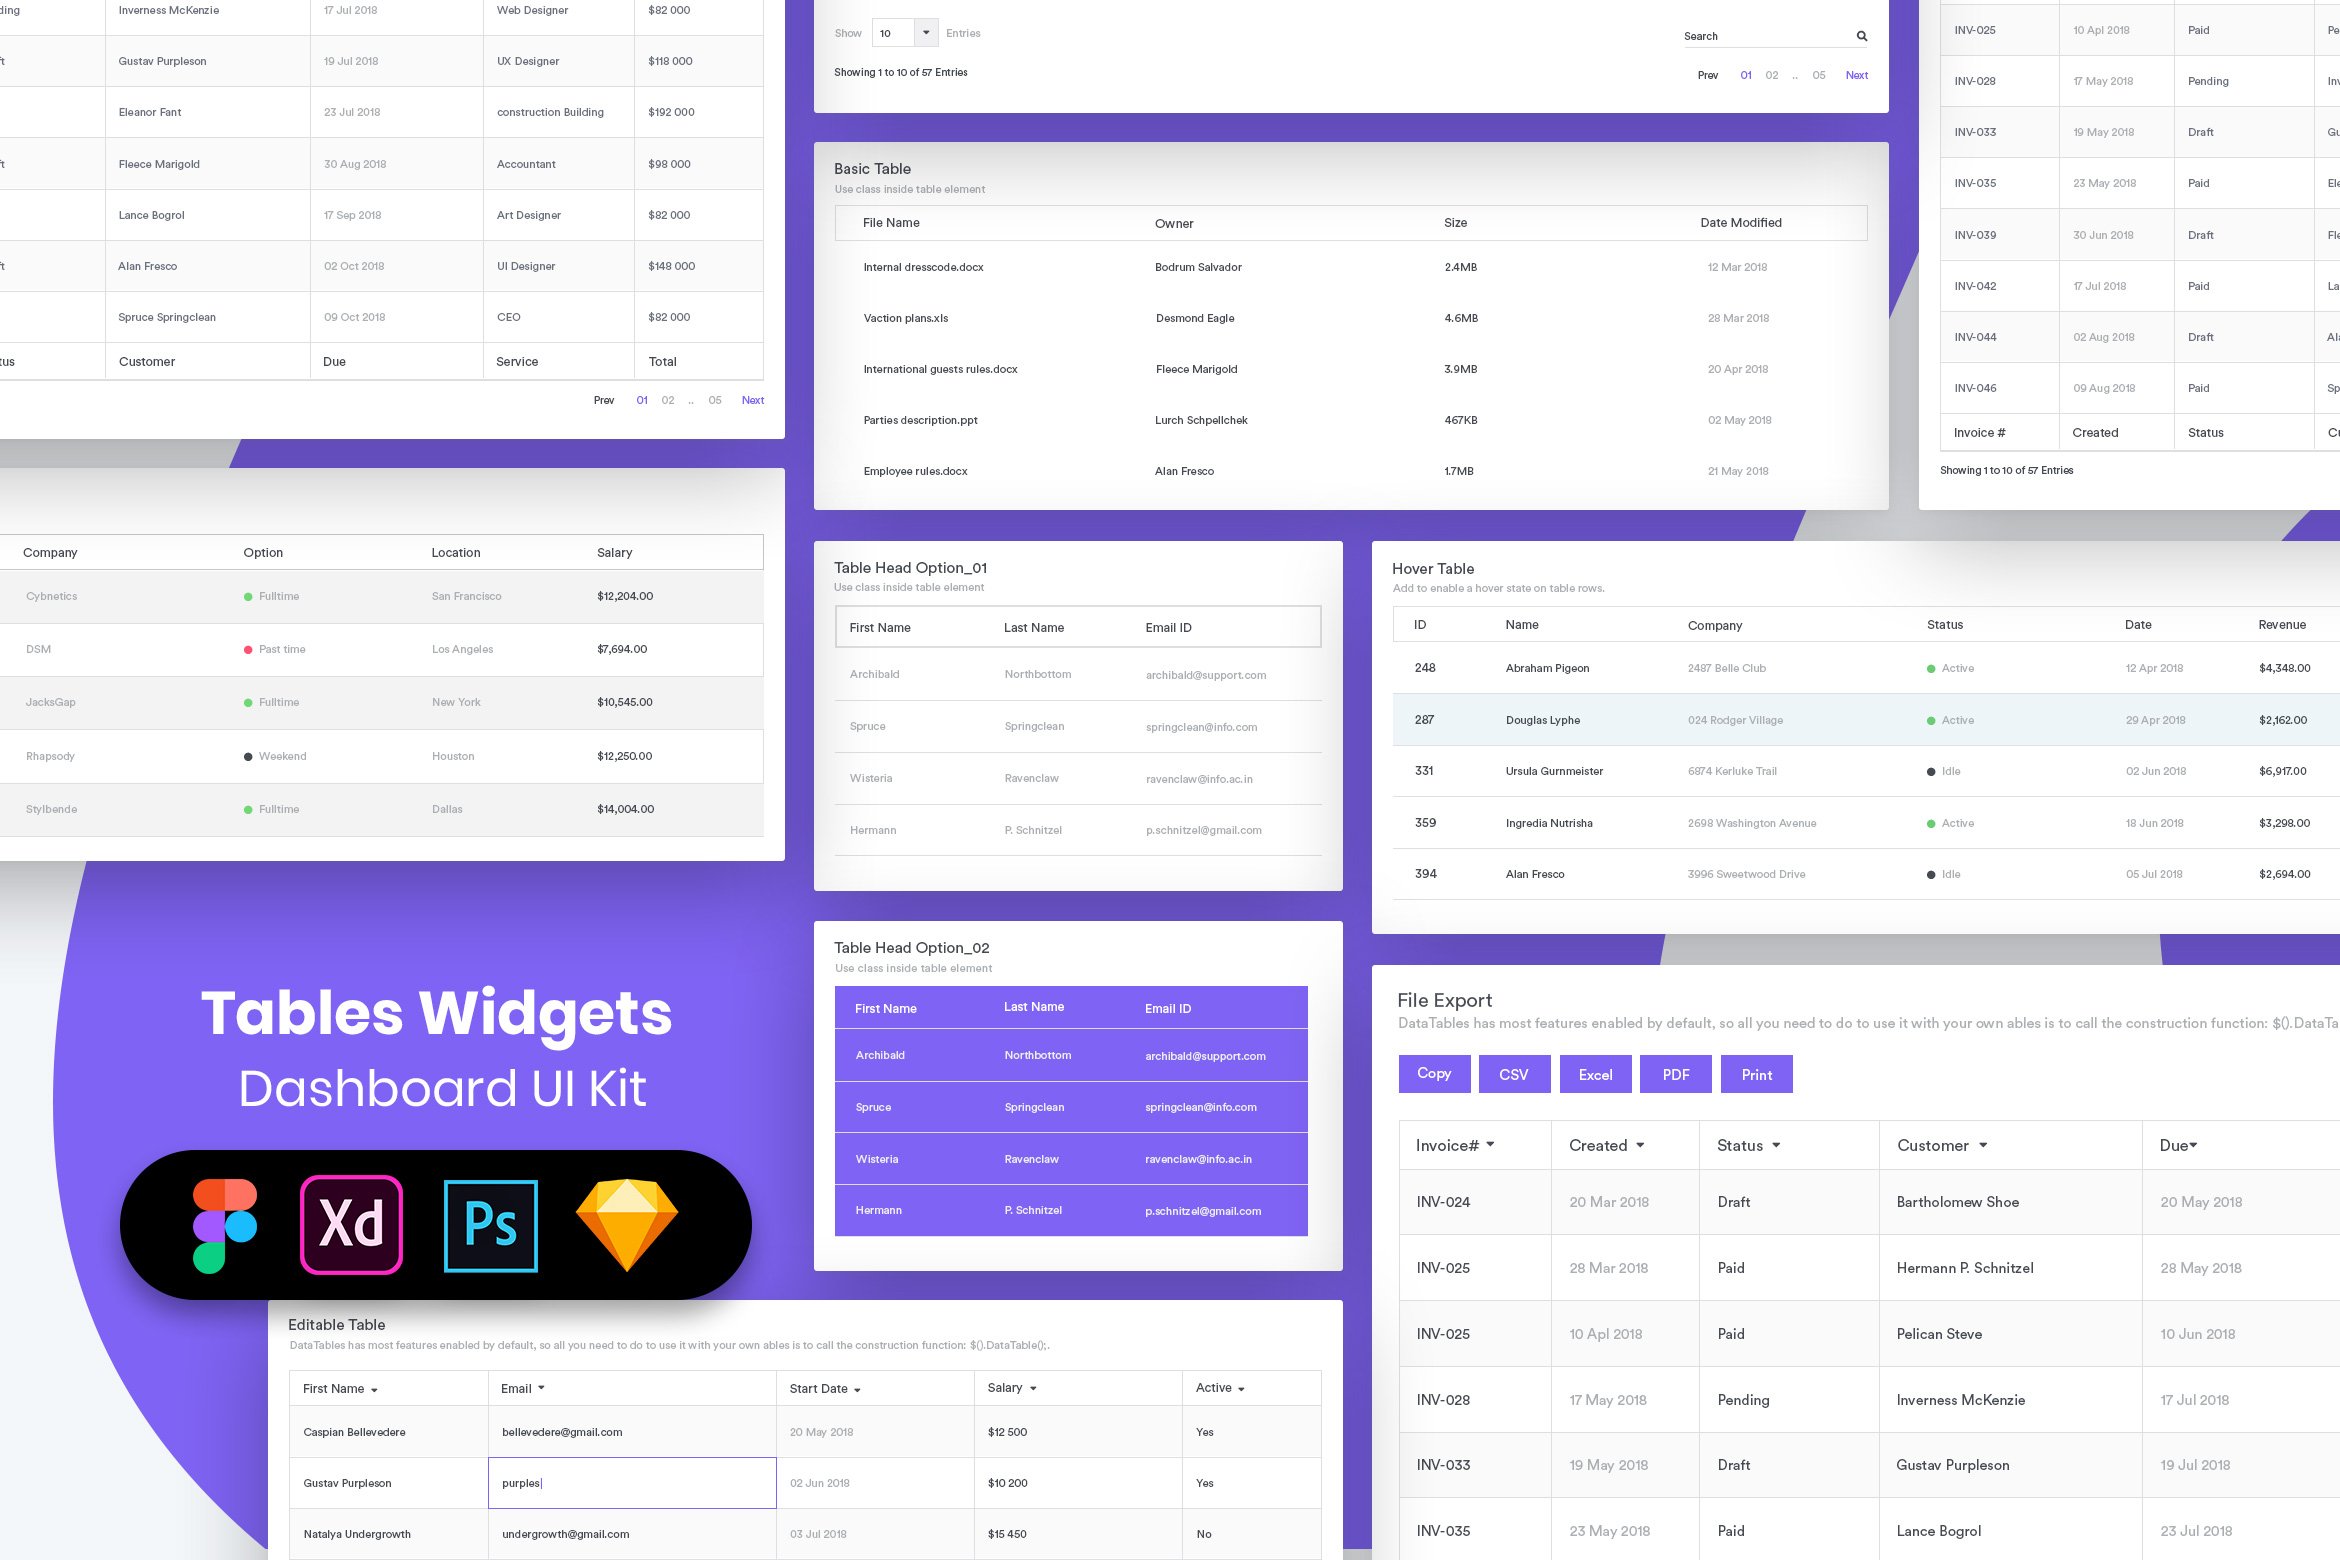 Tables Widgets Dashboard UI Kit cover image.